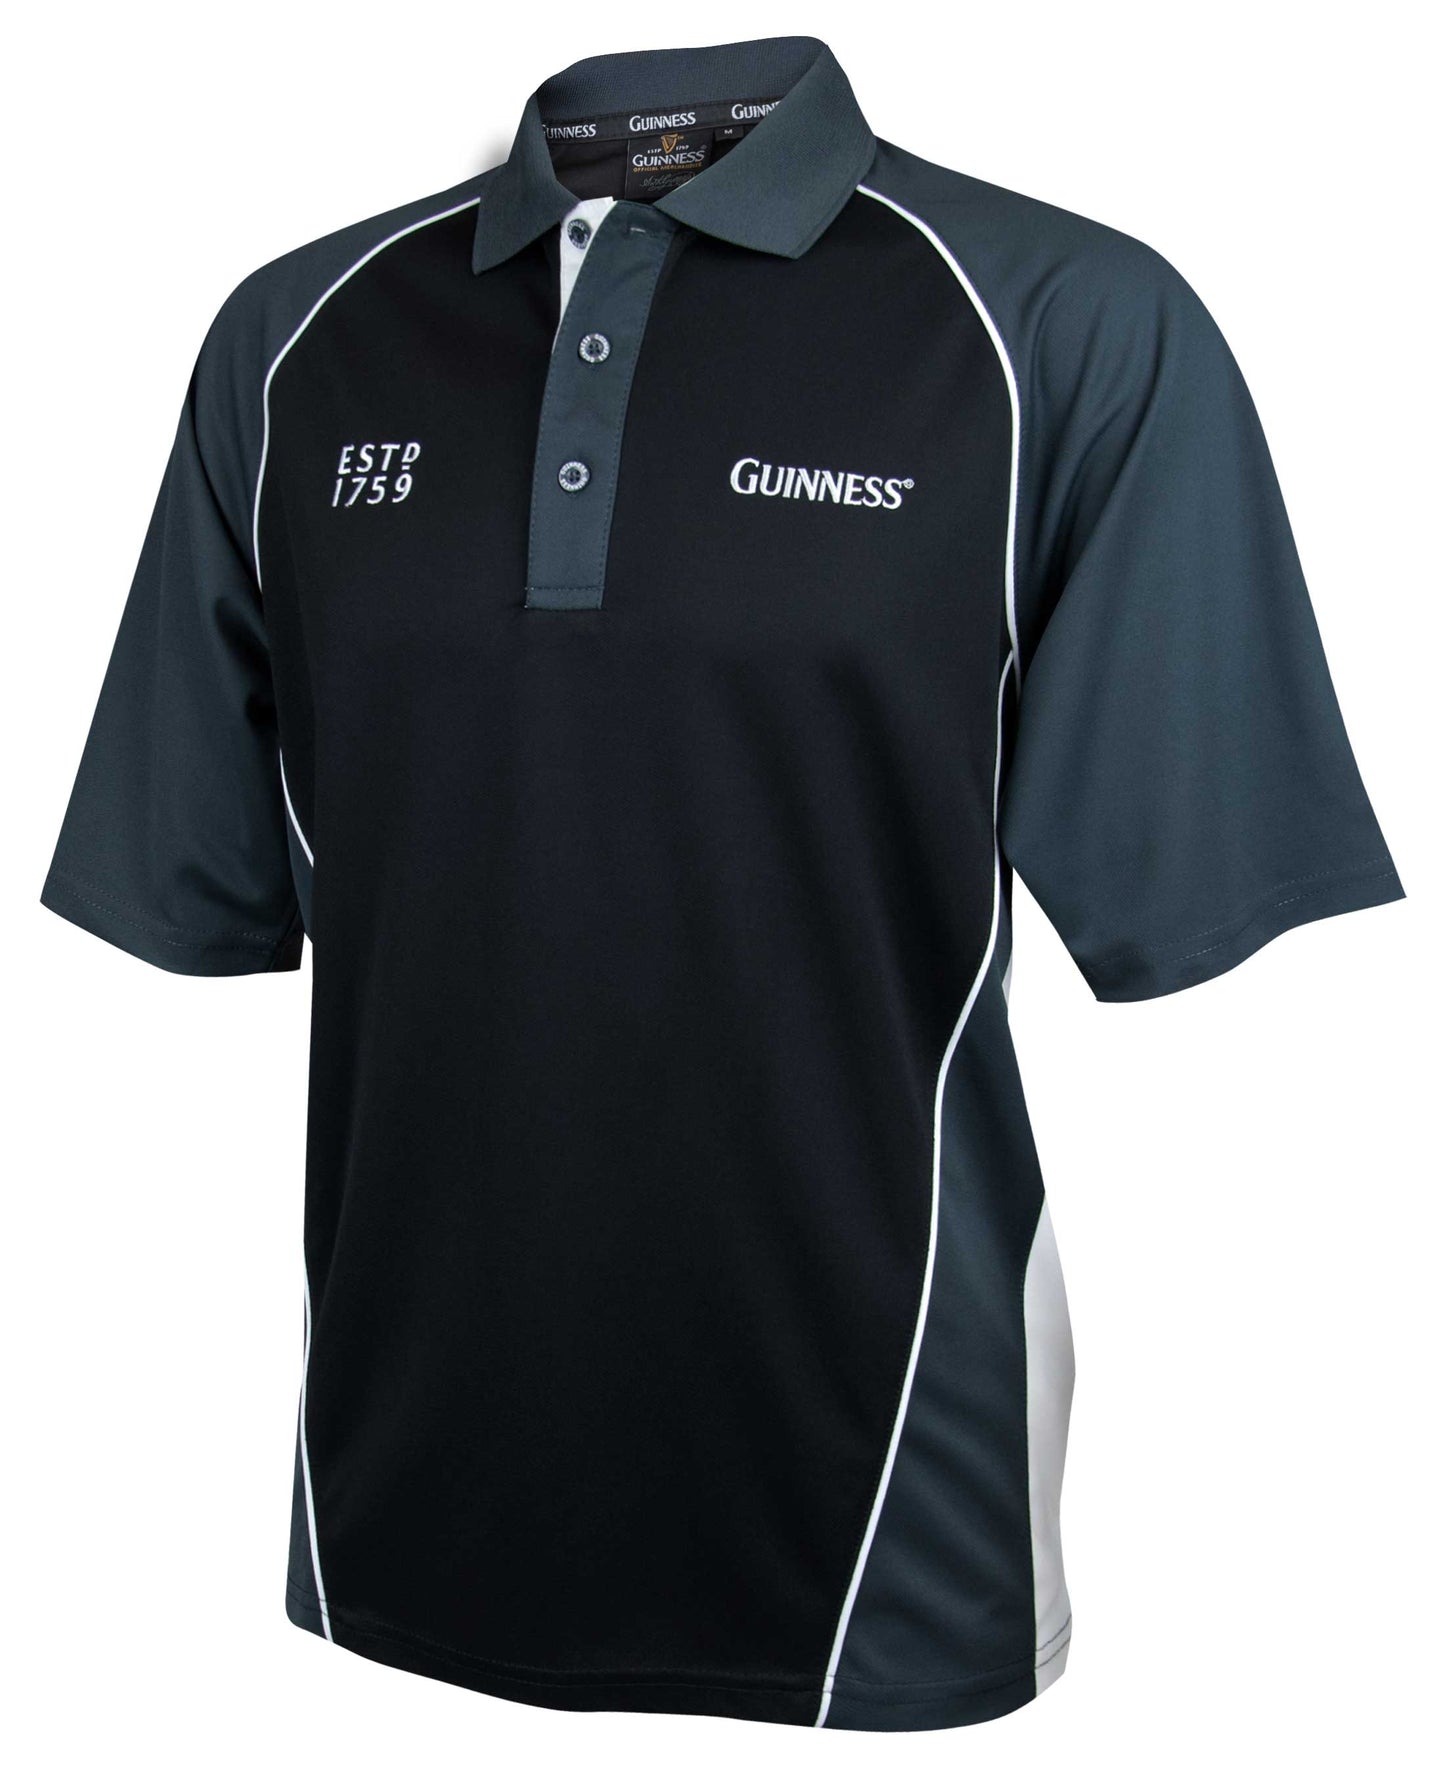 A black and white Guinness Performance Golf Shirt with the embroidered Guinness logo.